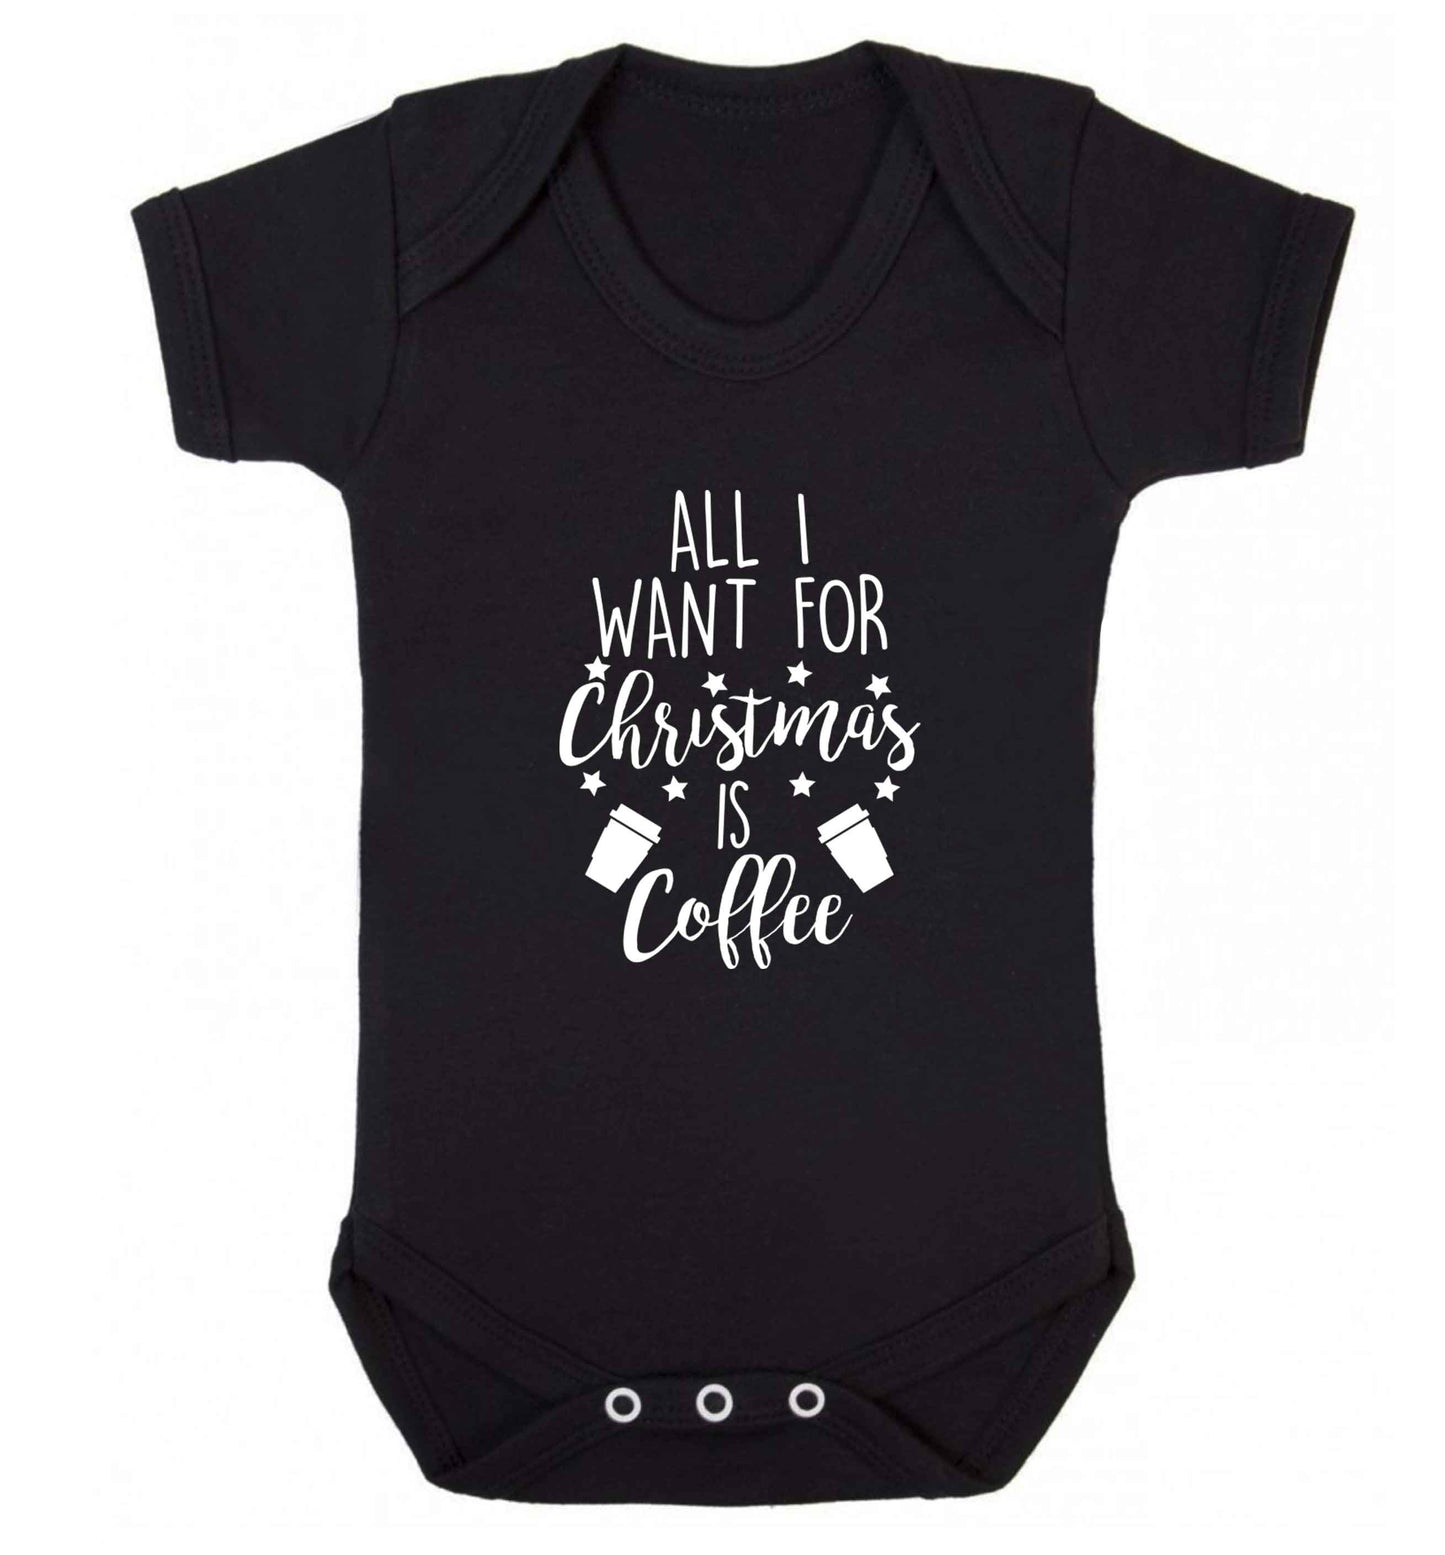 All I want for Christmas is coffee Baby Vest black 18-24 months